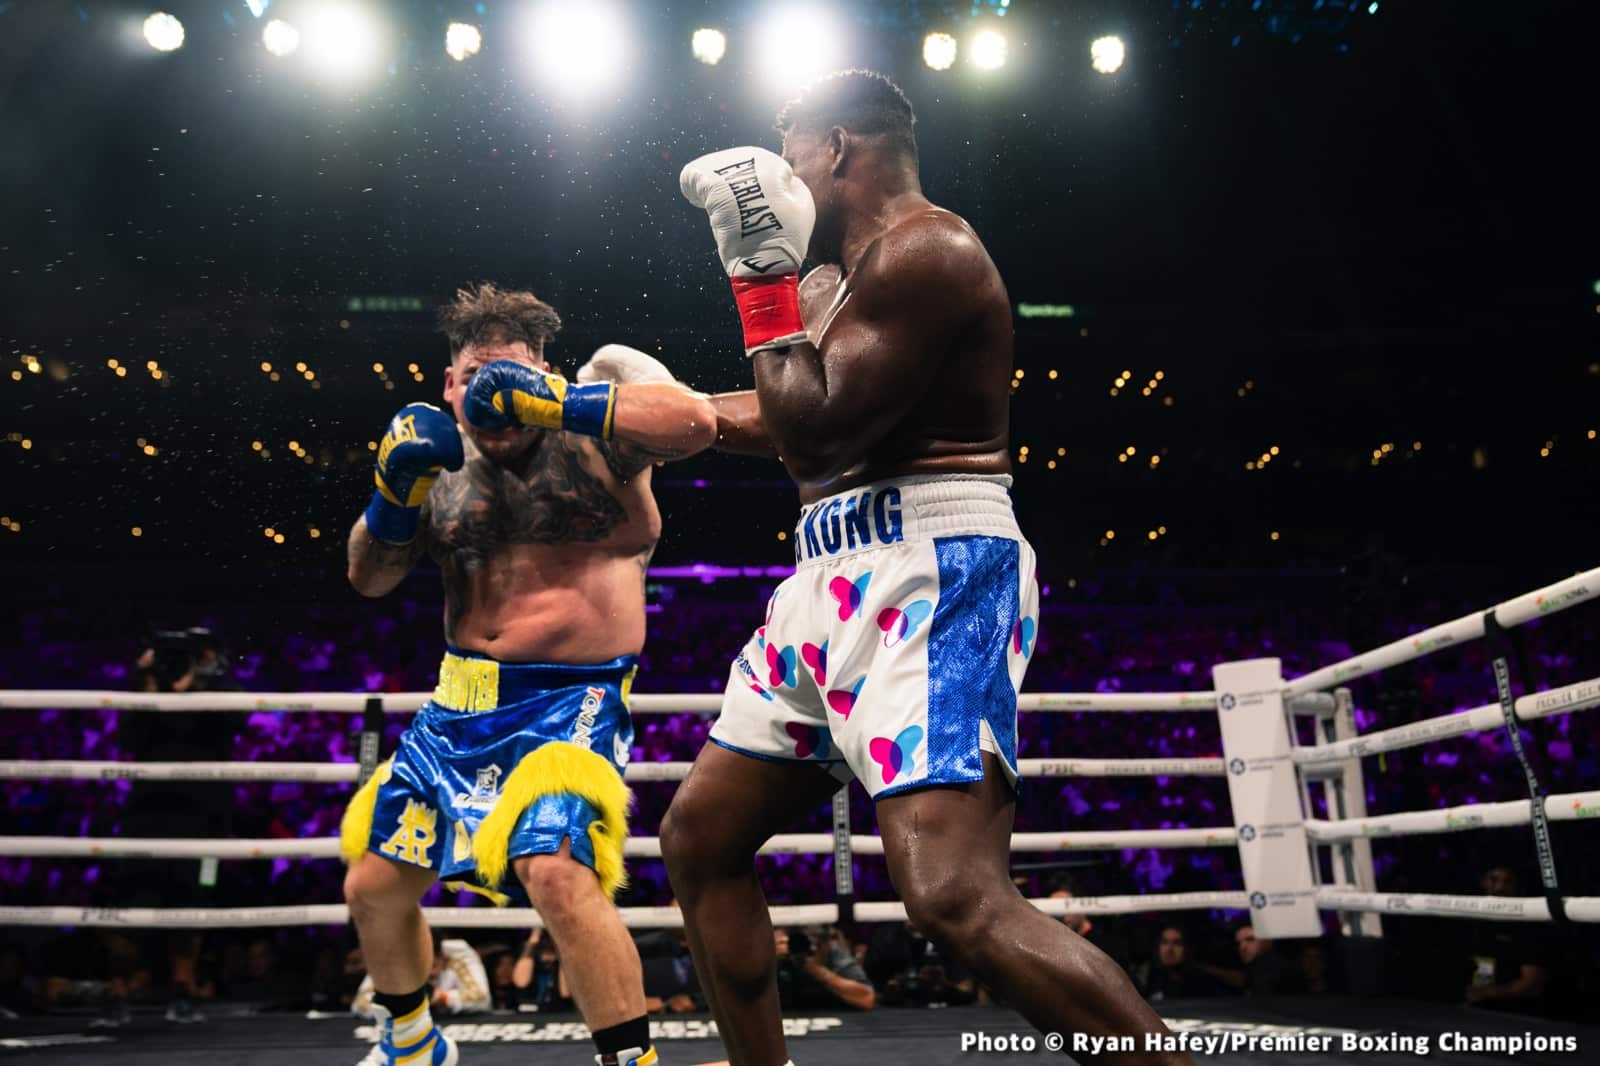 Image: Boxing Results: Andy “Destroyer” Ruiz Defeats Luis “King Kong” Ortiz!